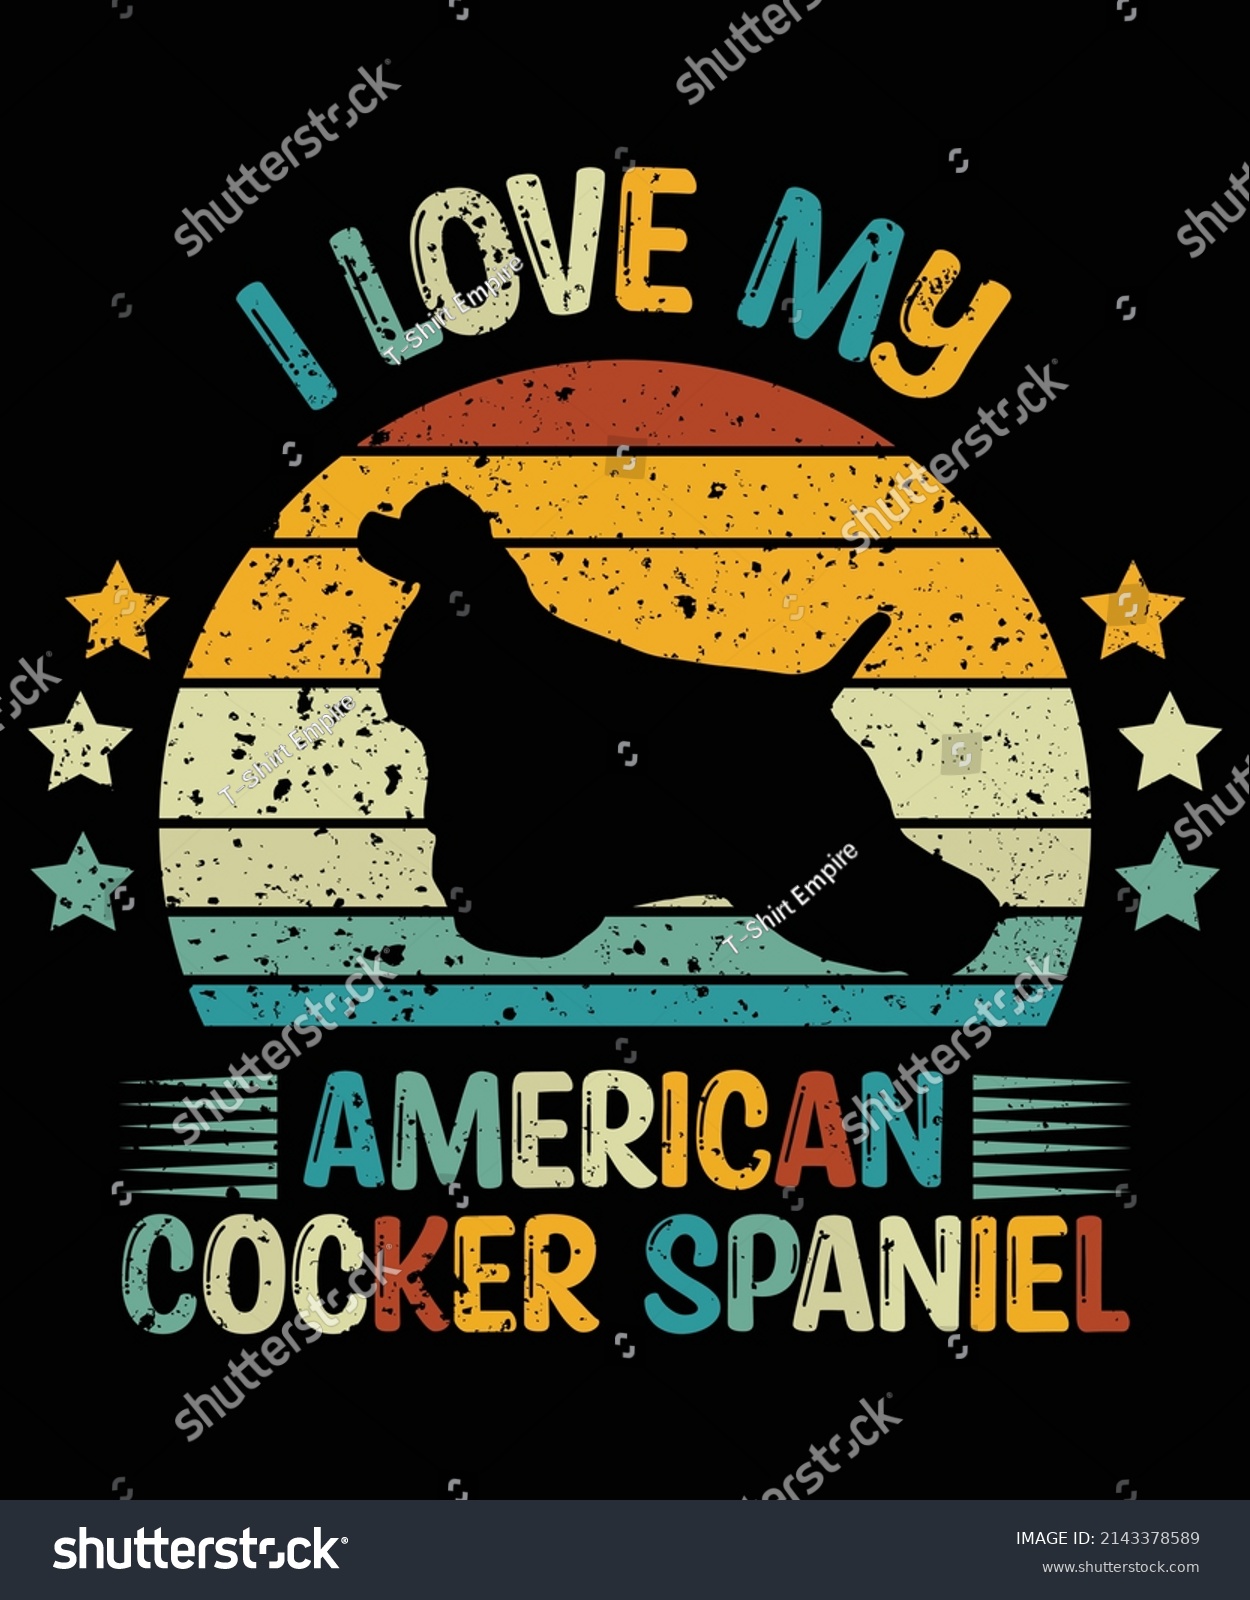 SVG of American Cocker Spaniel Silhouette vintage and retro t-shirt design svg